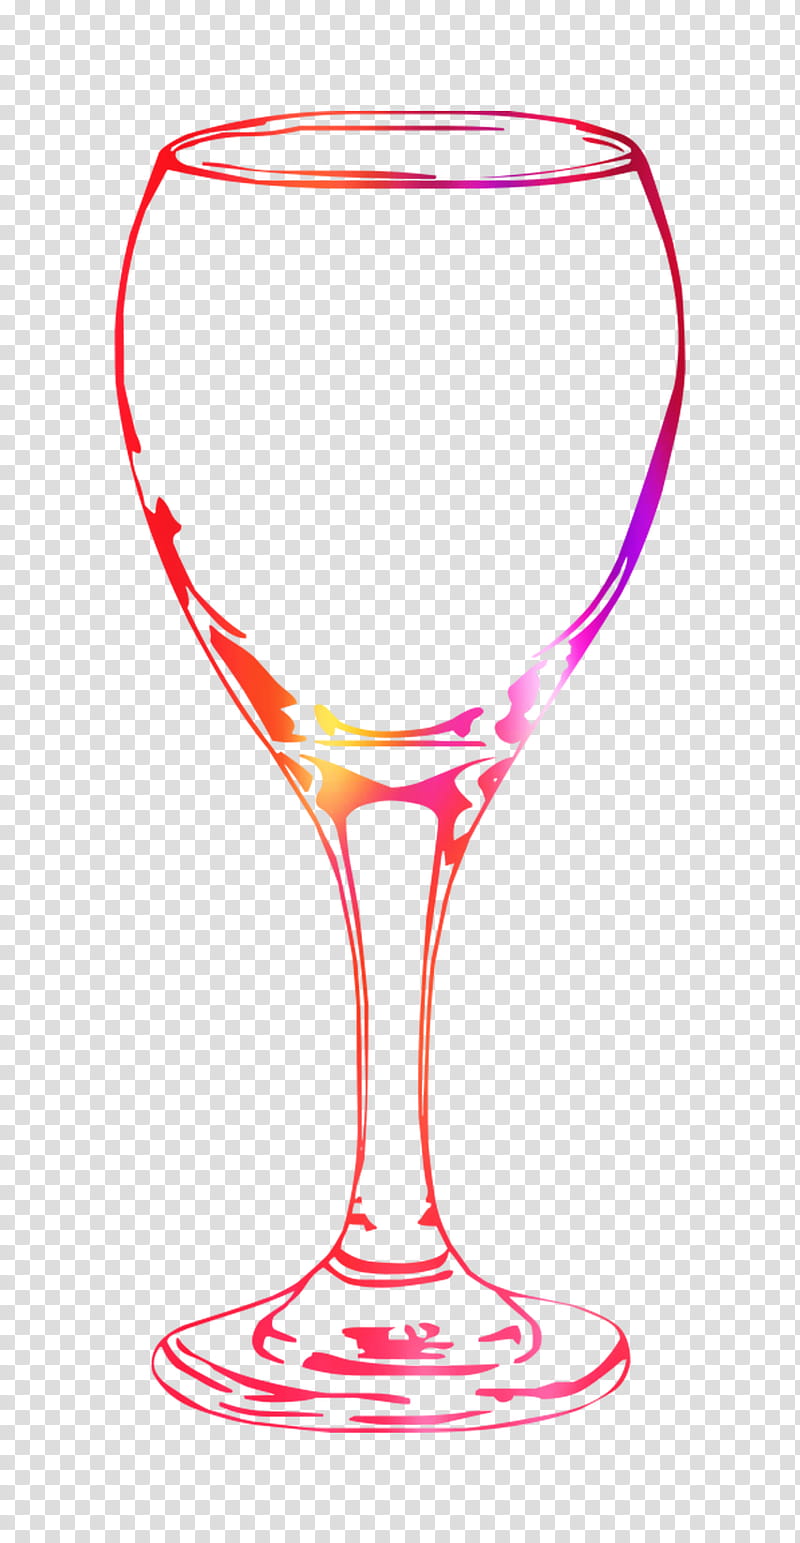 Wine Glass, Pink Lady, Champagne Glass, Martini, Cocktail Glass, Tennis, Pink M, Line transparent background PNG clipart